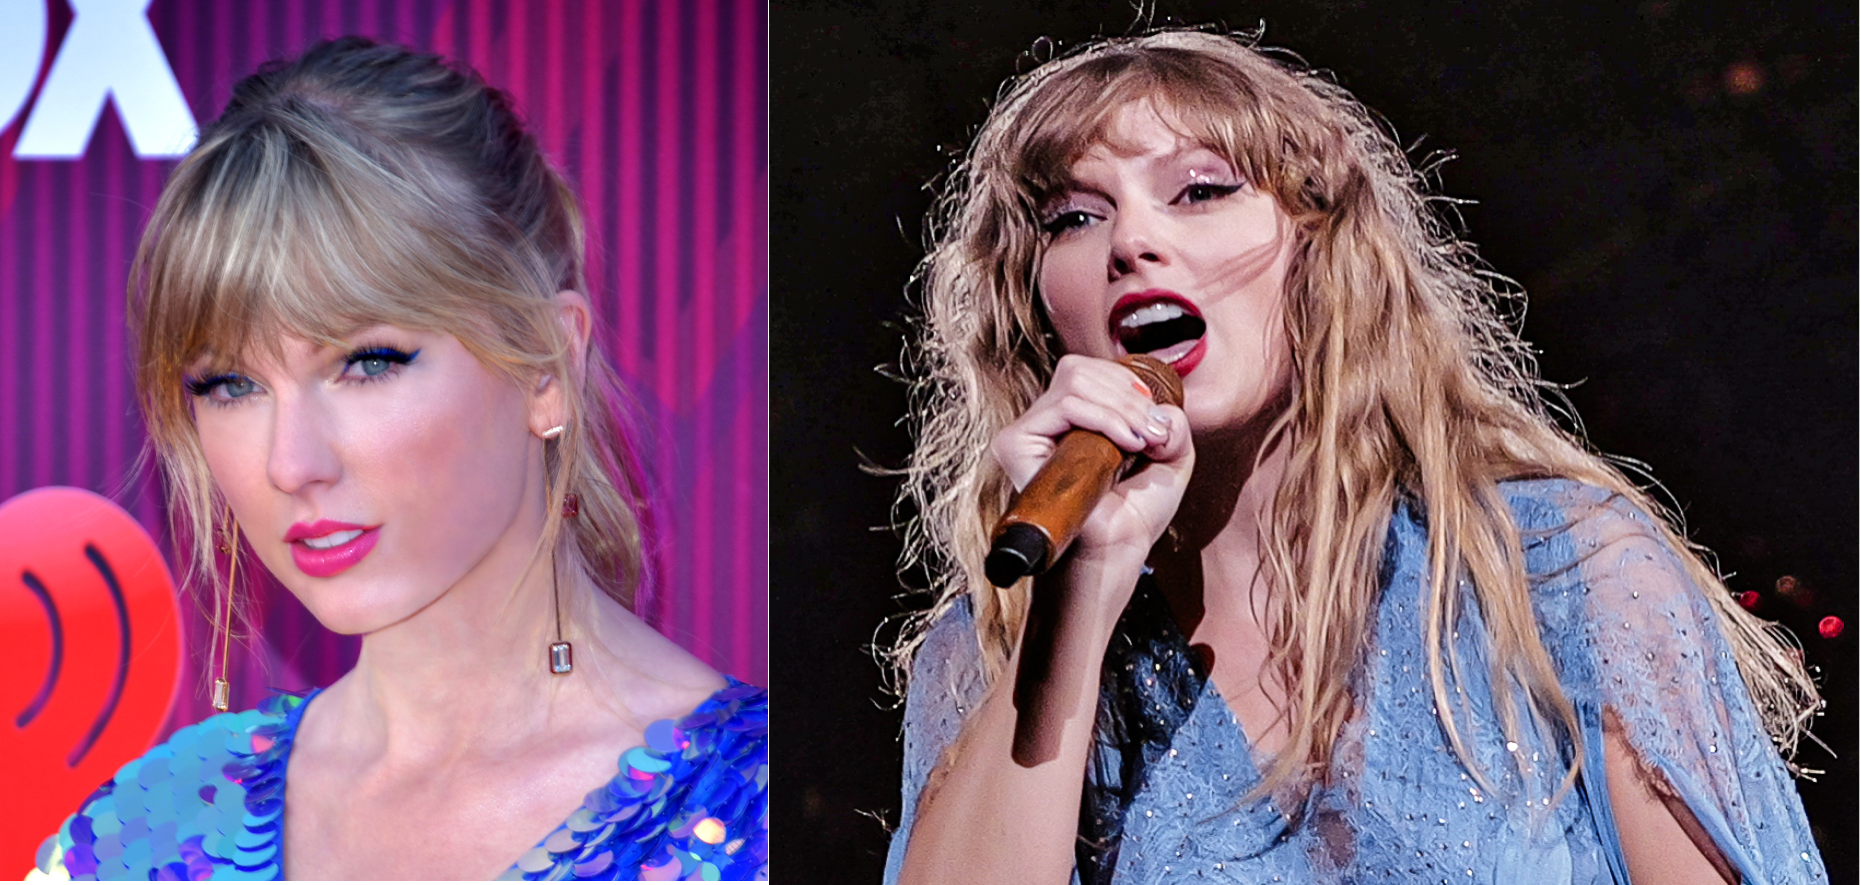 Taylor Swift in a sparkly blue dress and pink lipstick, Taylor Swift in a blue dress